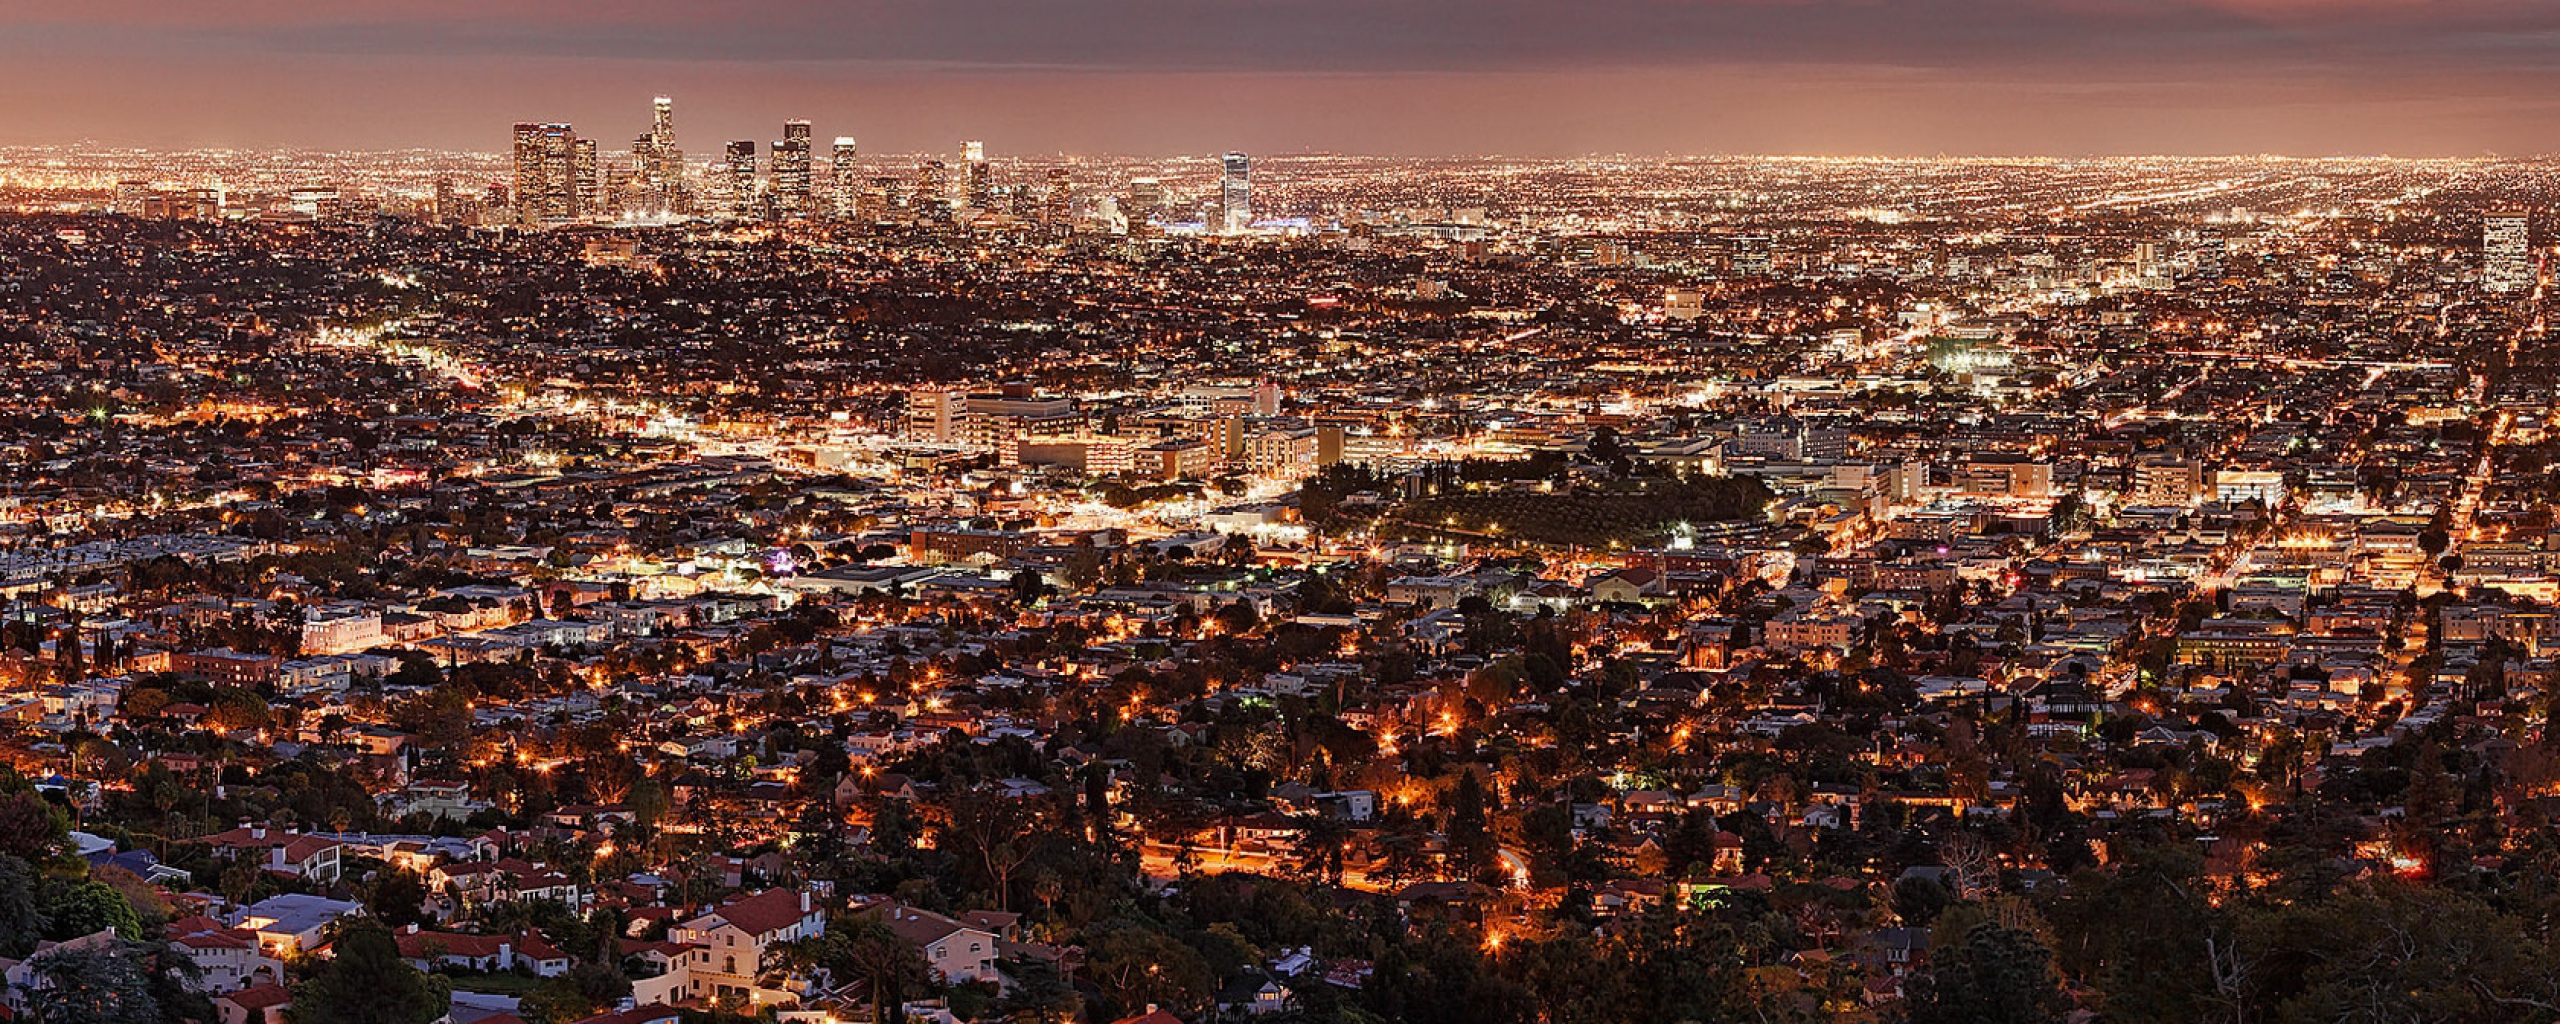 High Definition Los Angeles Wallpaper Image In 3d For